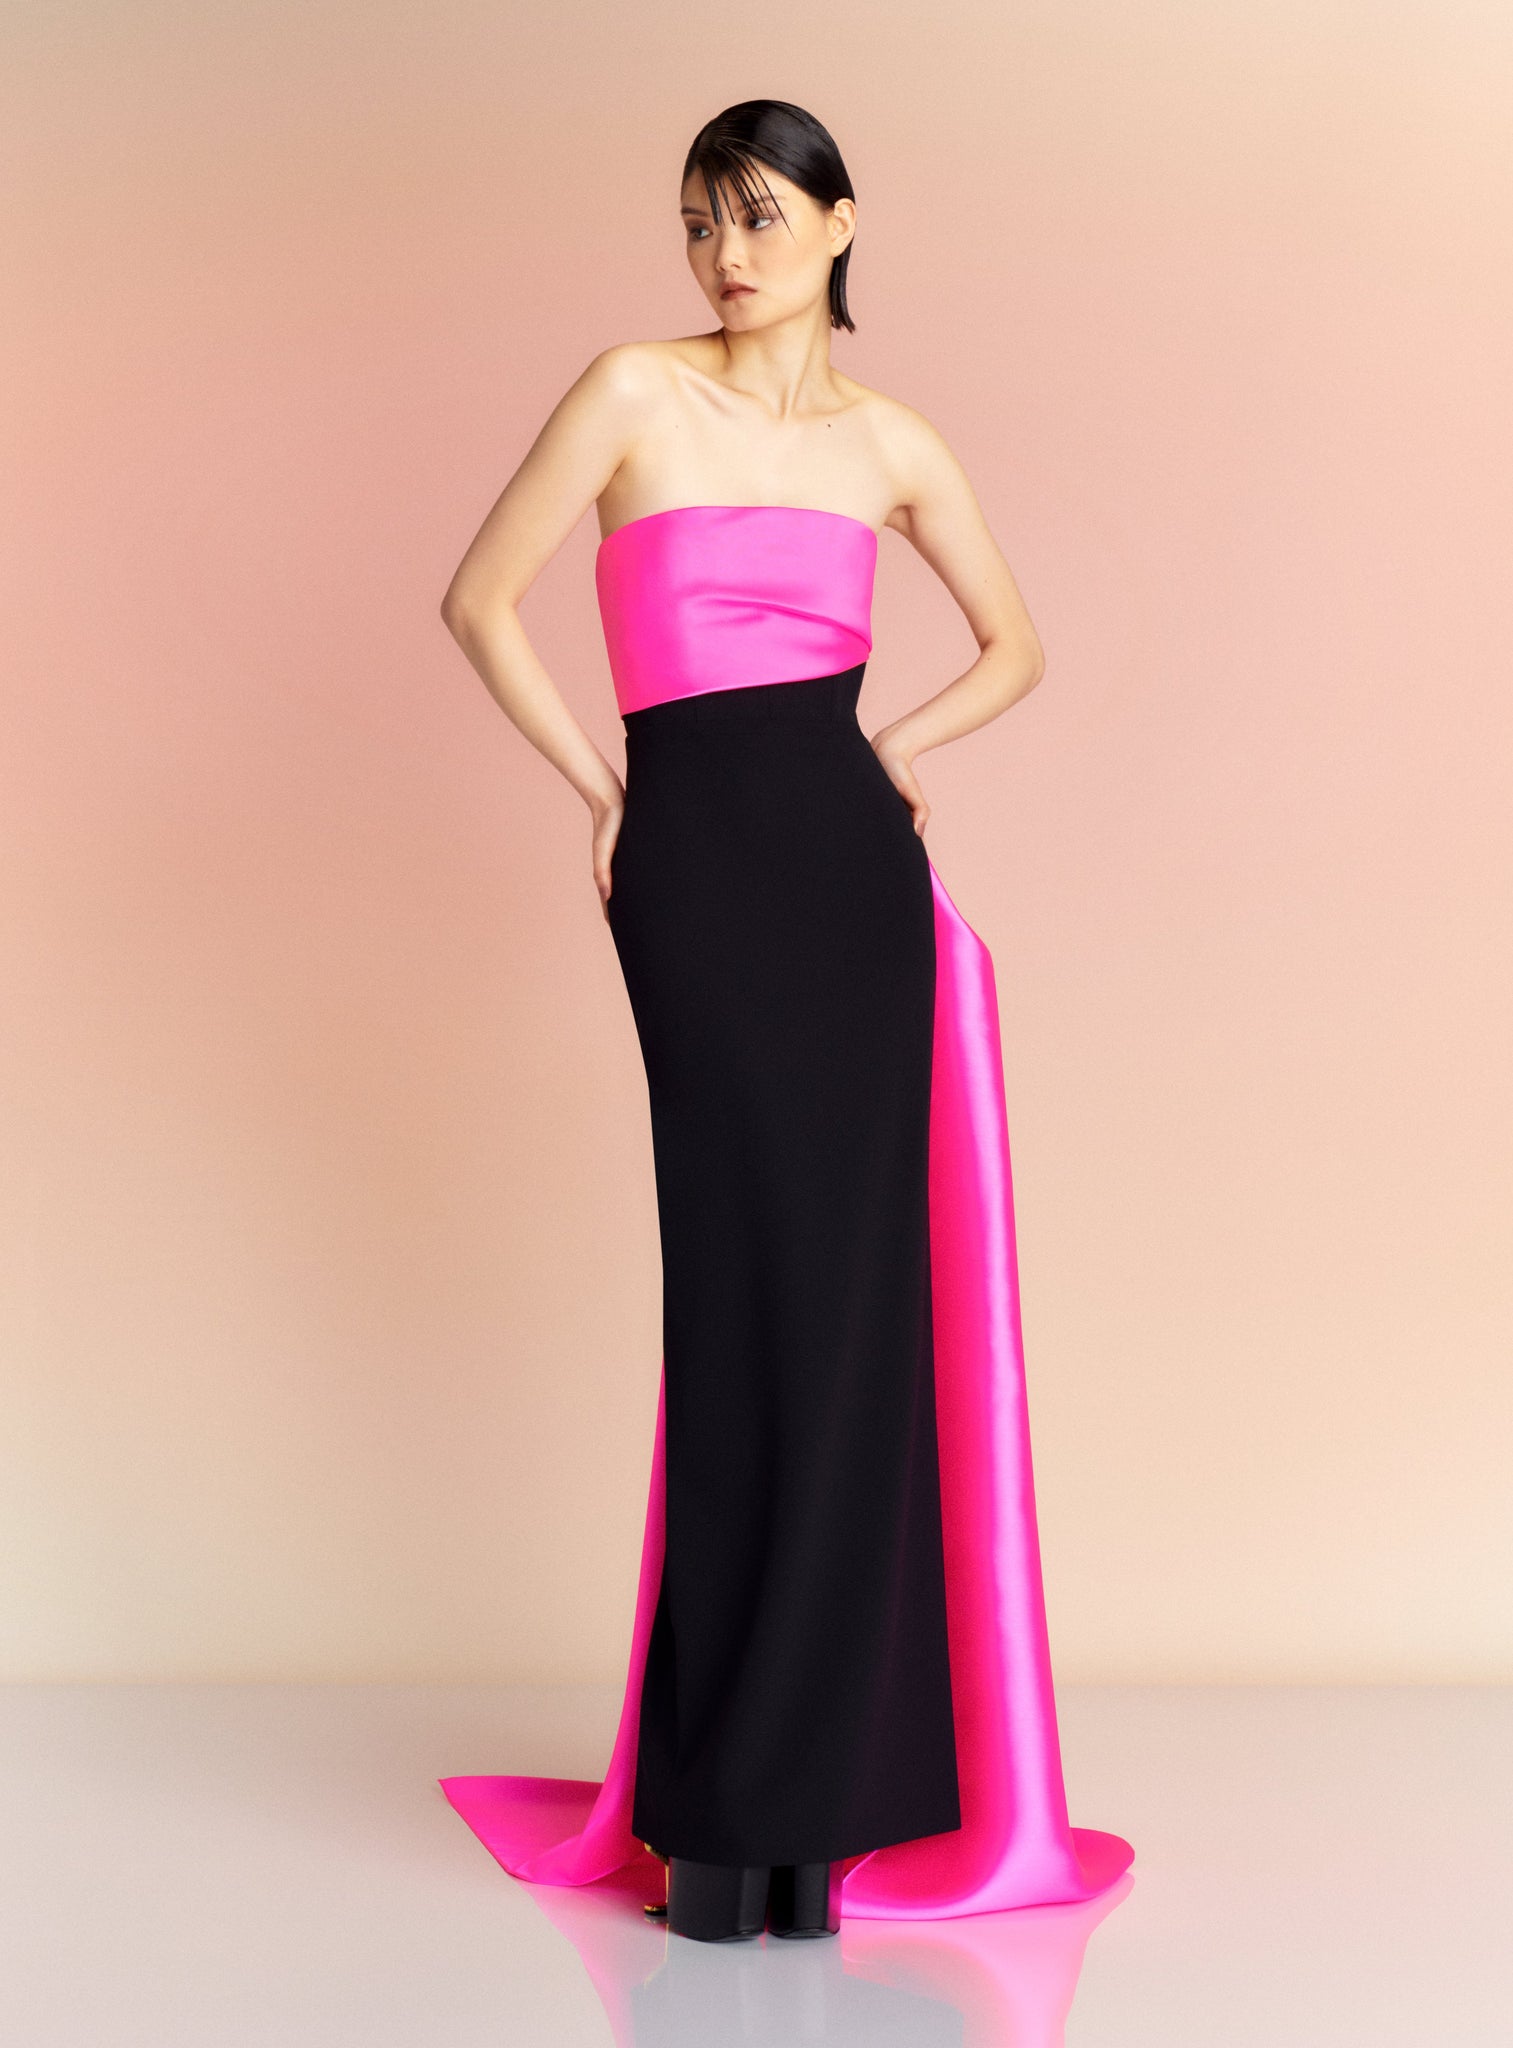 The Kinsley Maxi Dress in Hot Pink & Black